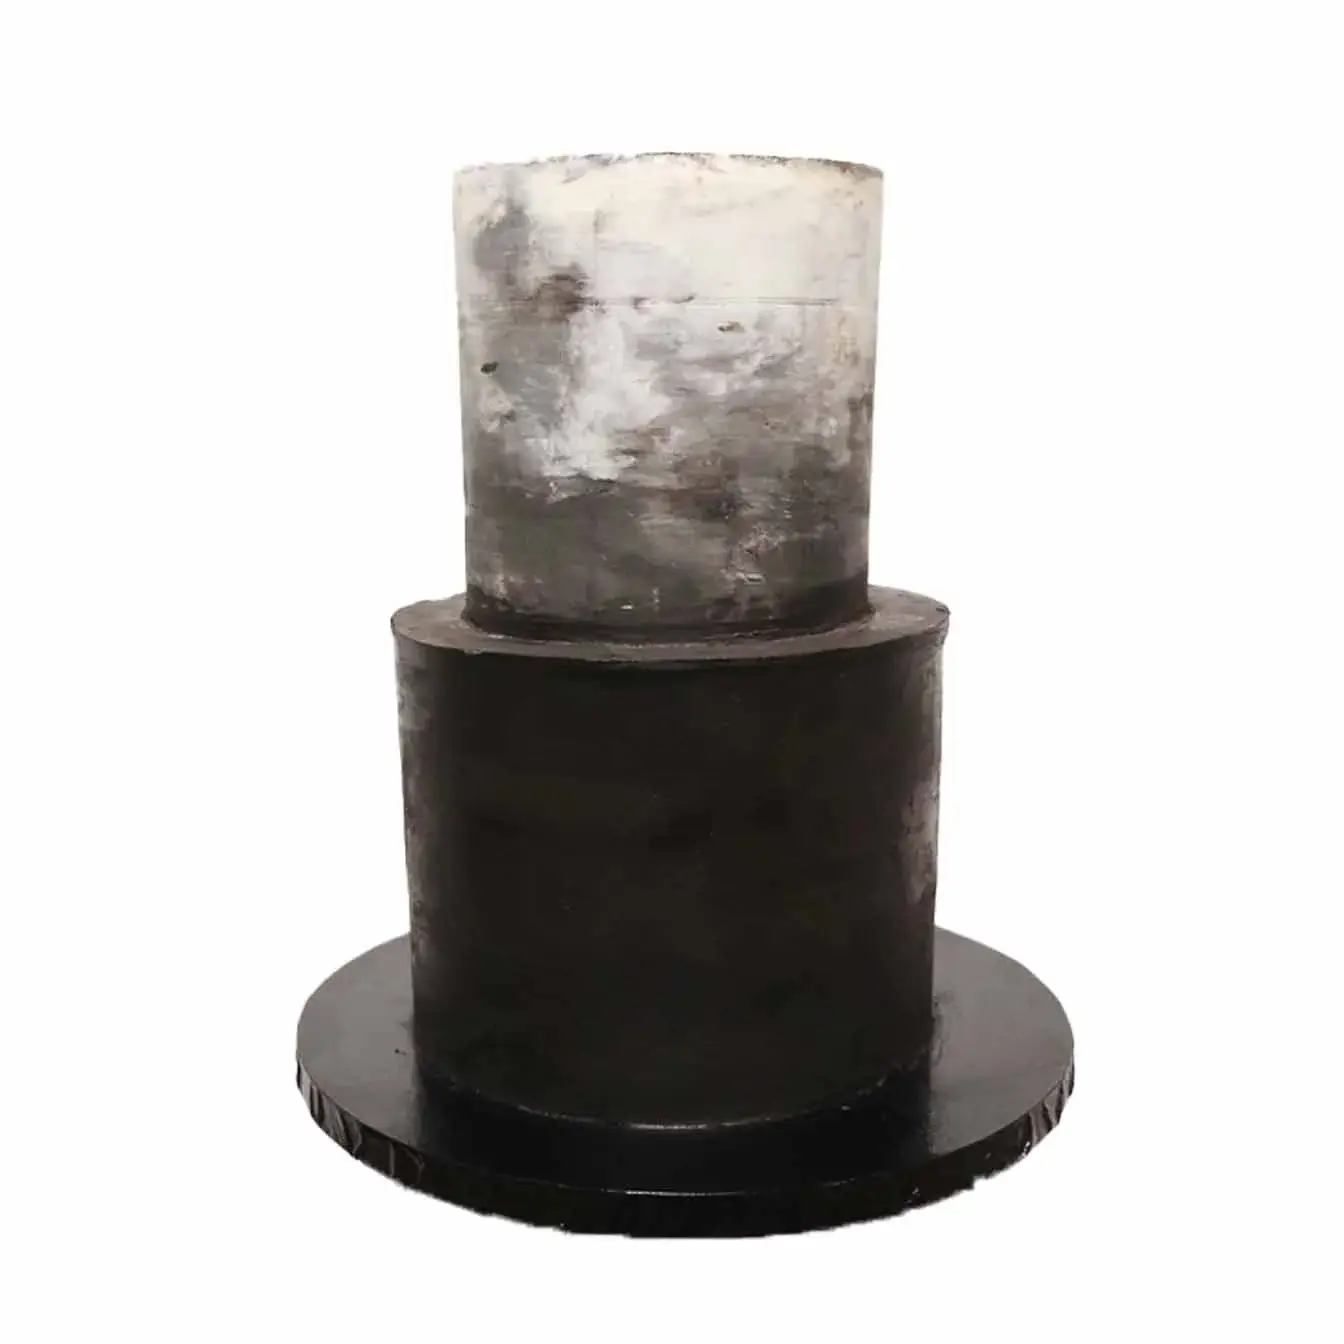 Monochrome Concrete Elegance Cake - A two-tier cake with a sleek black bottom tier and a top tier featuring a black and white concrete effect, a sophisticated centerpiece for upscale events and weddings.